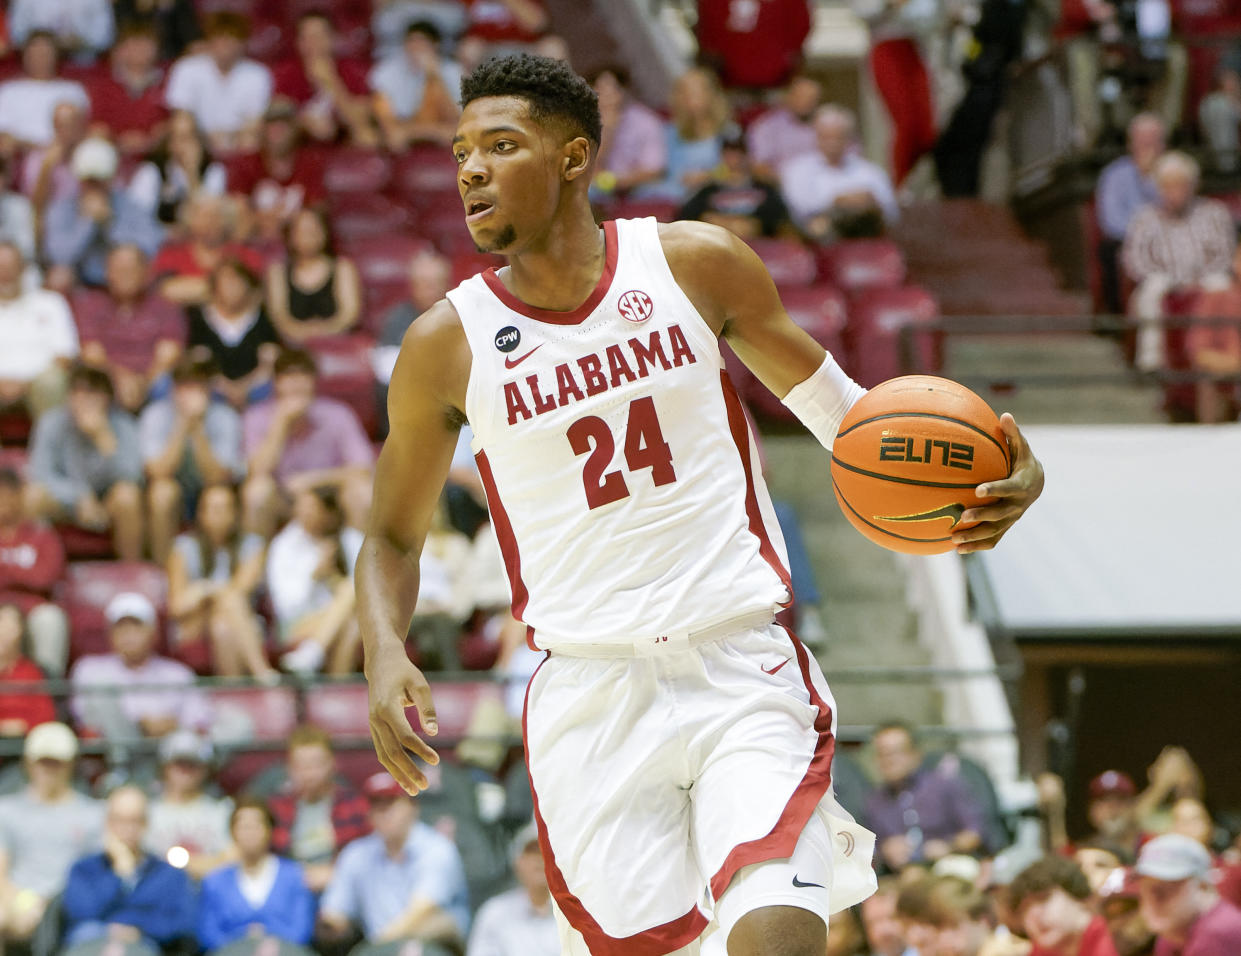 Alabama forward Brandon Miller with the ball in the first half of the Crimson Tide's season opener at Coleman Coliseum in Tuscaloosa, Alabama, on Nov. 7, 2022. (Marvin Gentry/USA TODAY Sports)